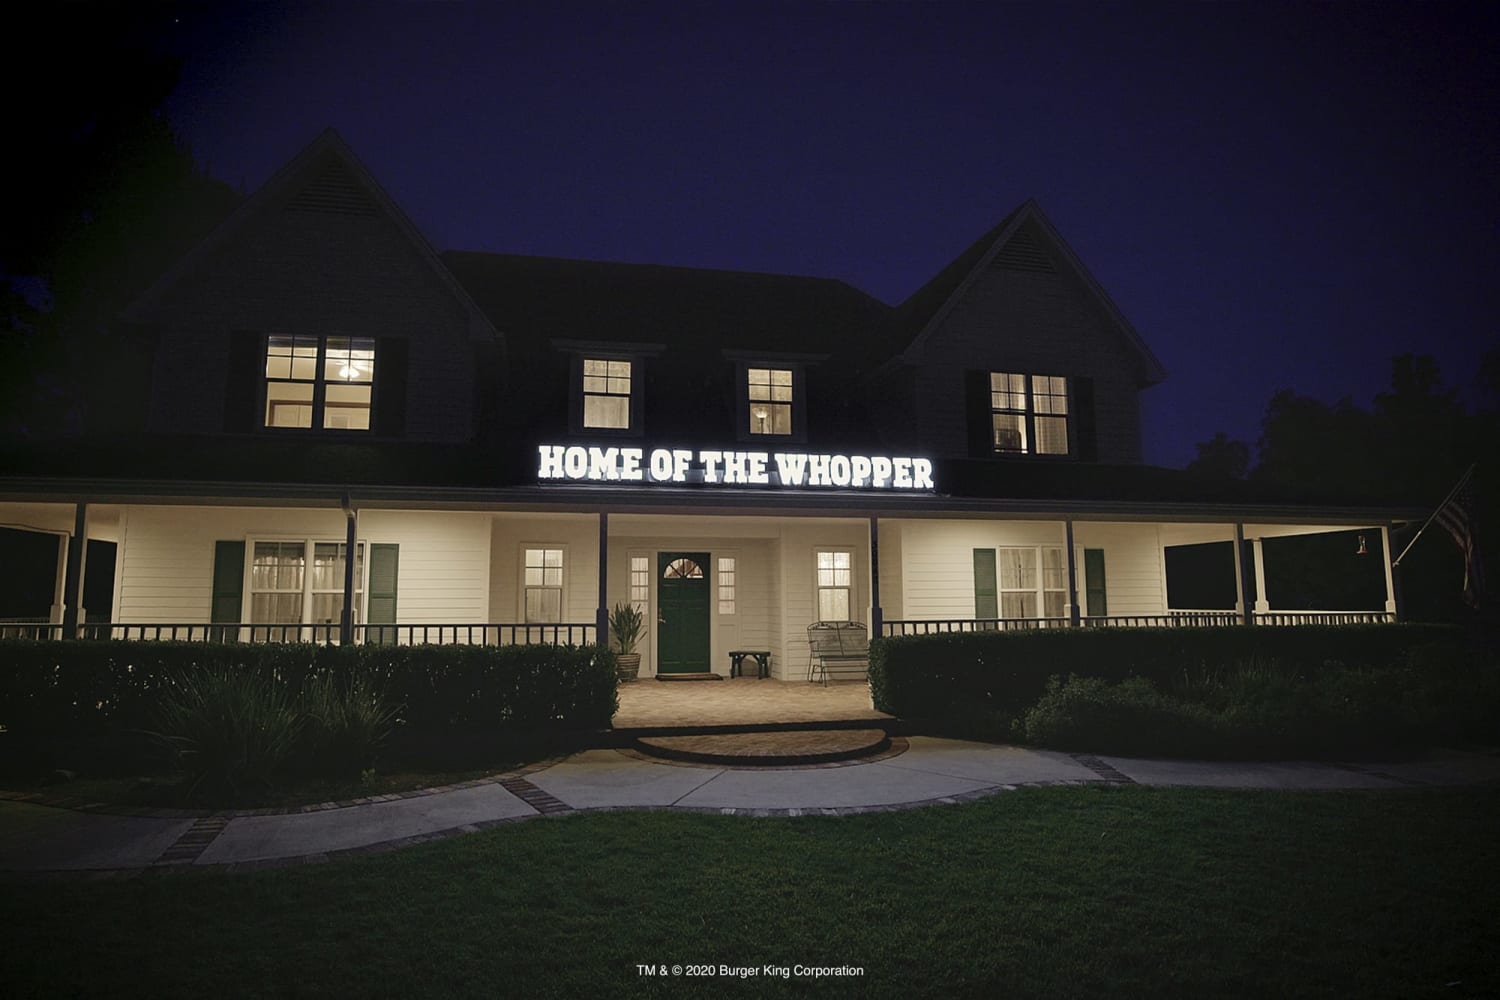 Burger King wants to turn your house into the Home of Whopper